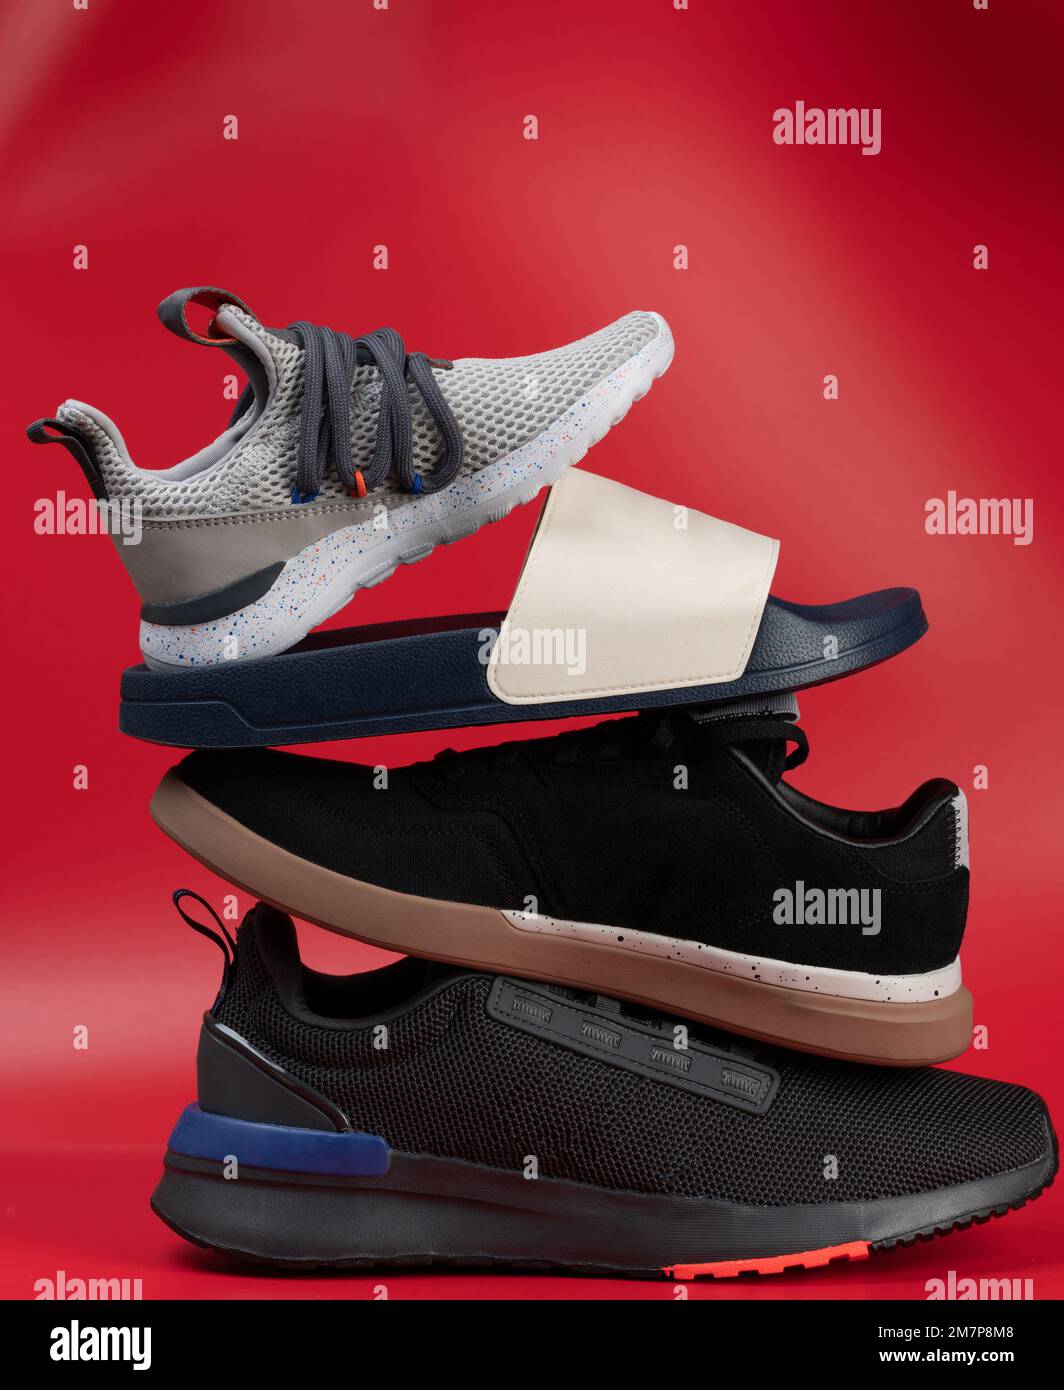 Group of sport and casual new shoes ontop of each other in stack isolatedon red studio background Stock Photo